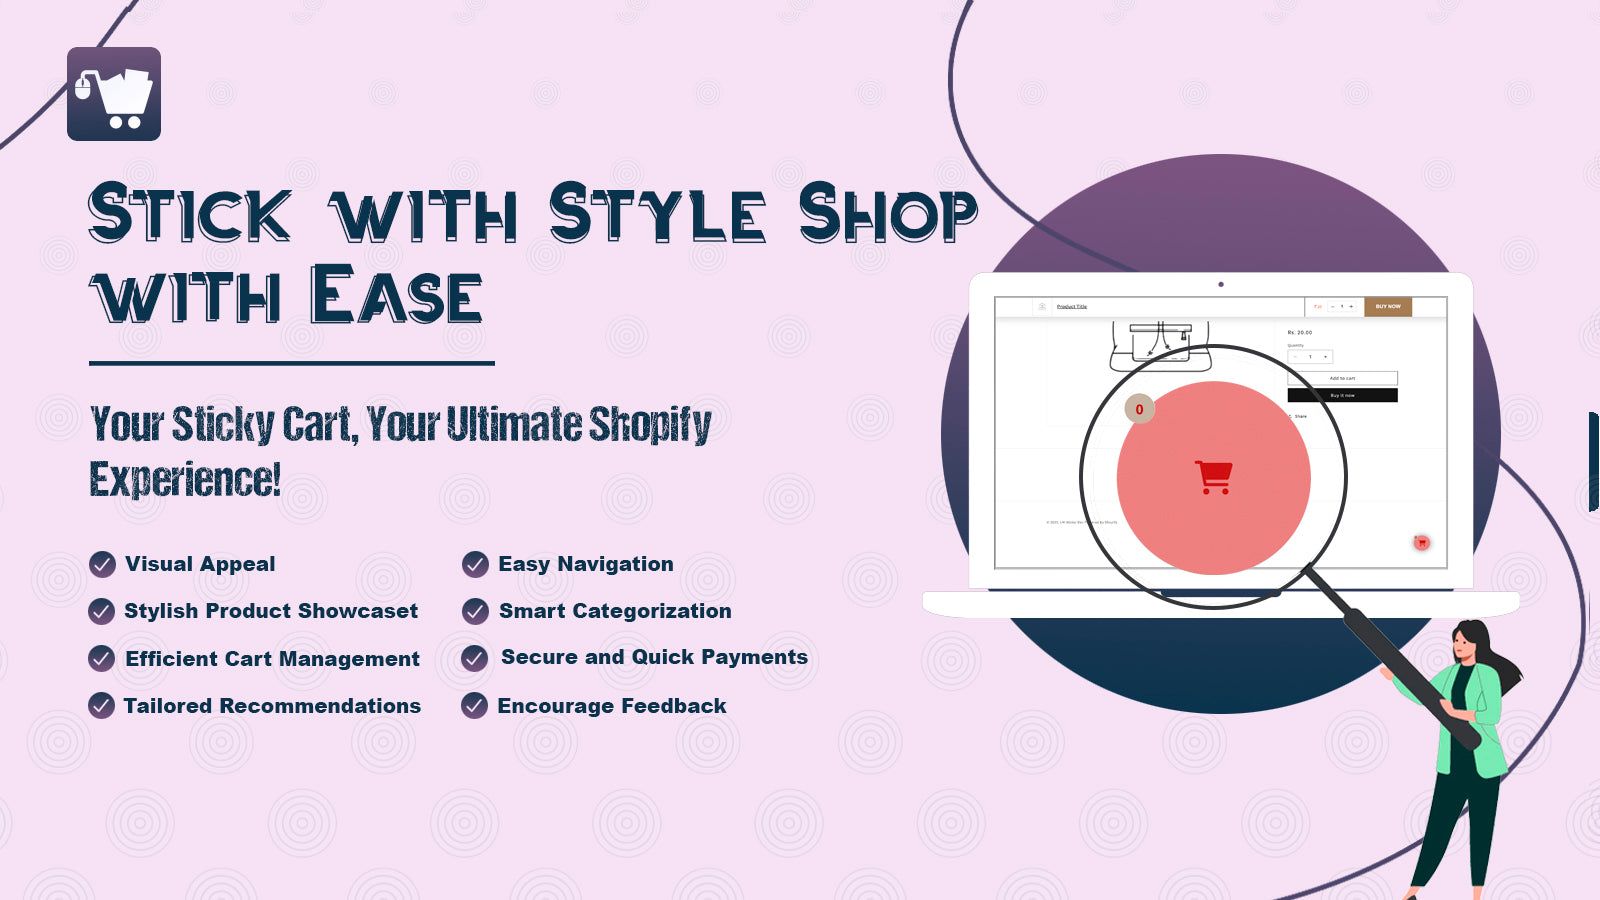 Stick with style shop with ease